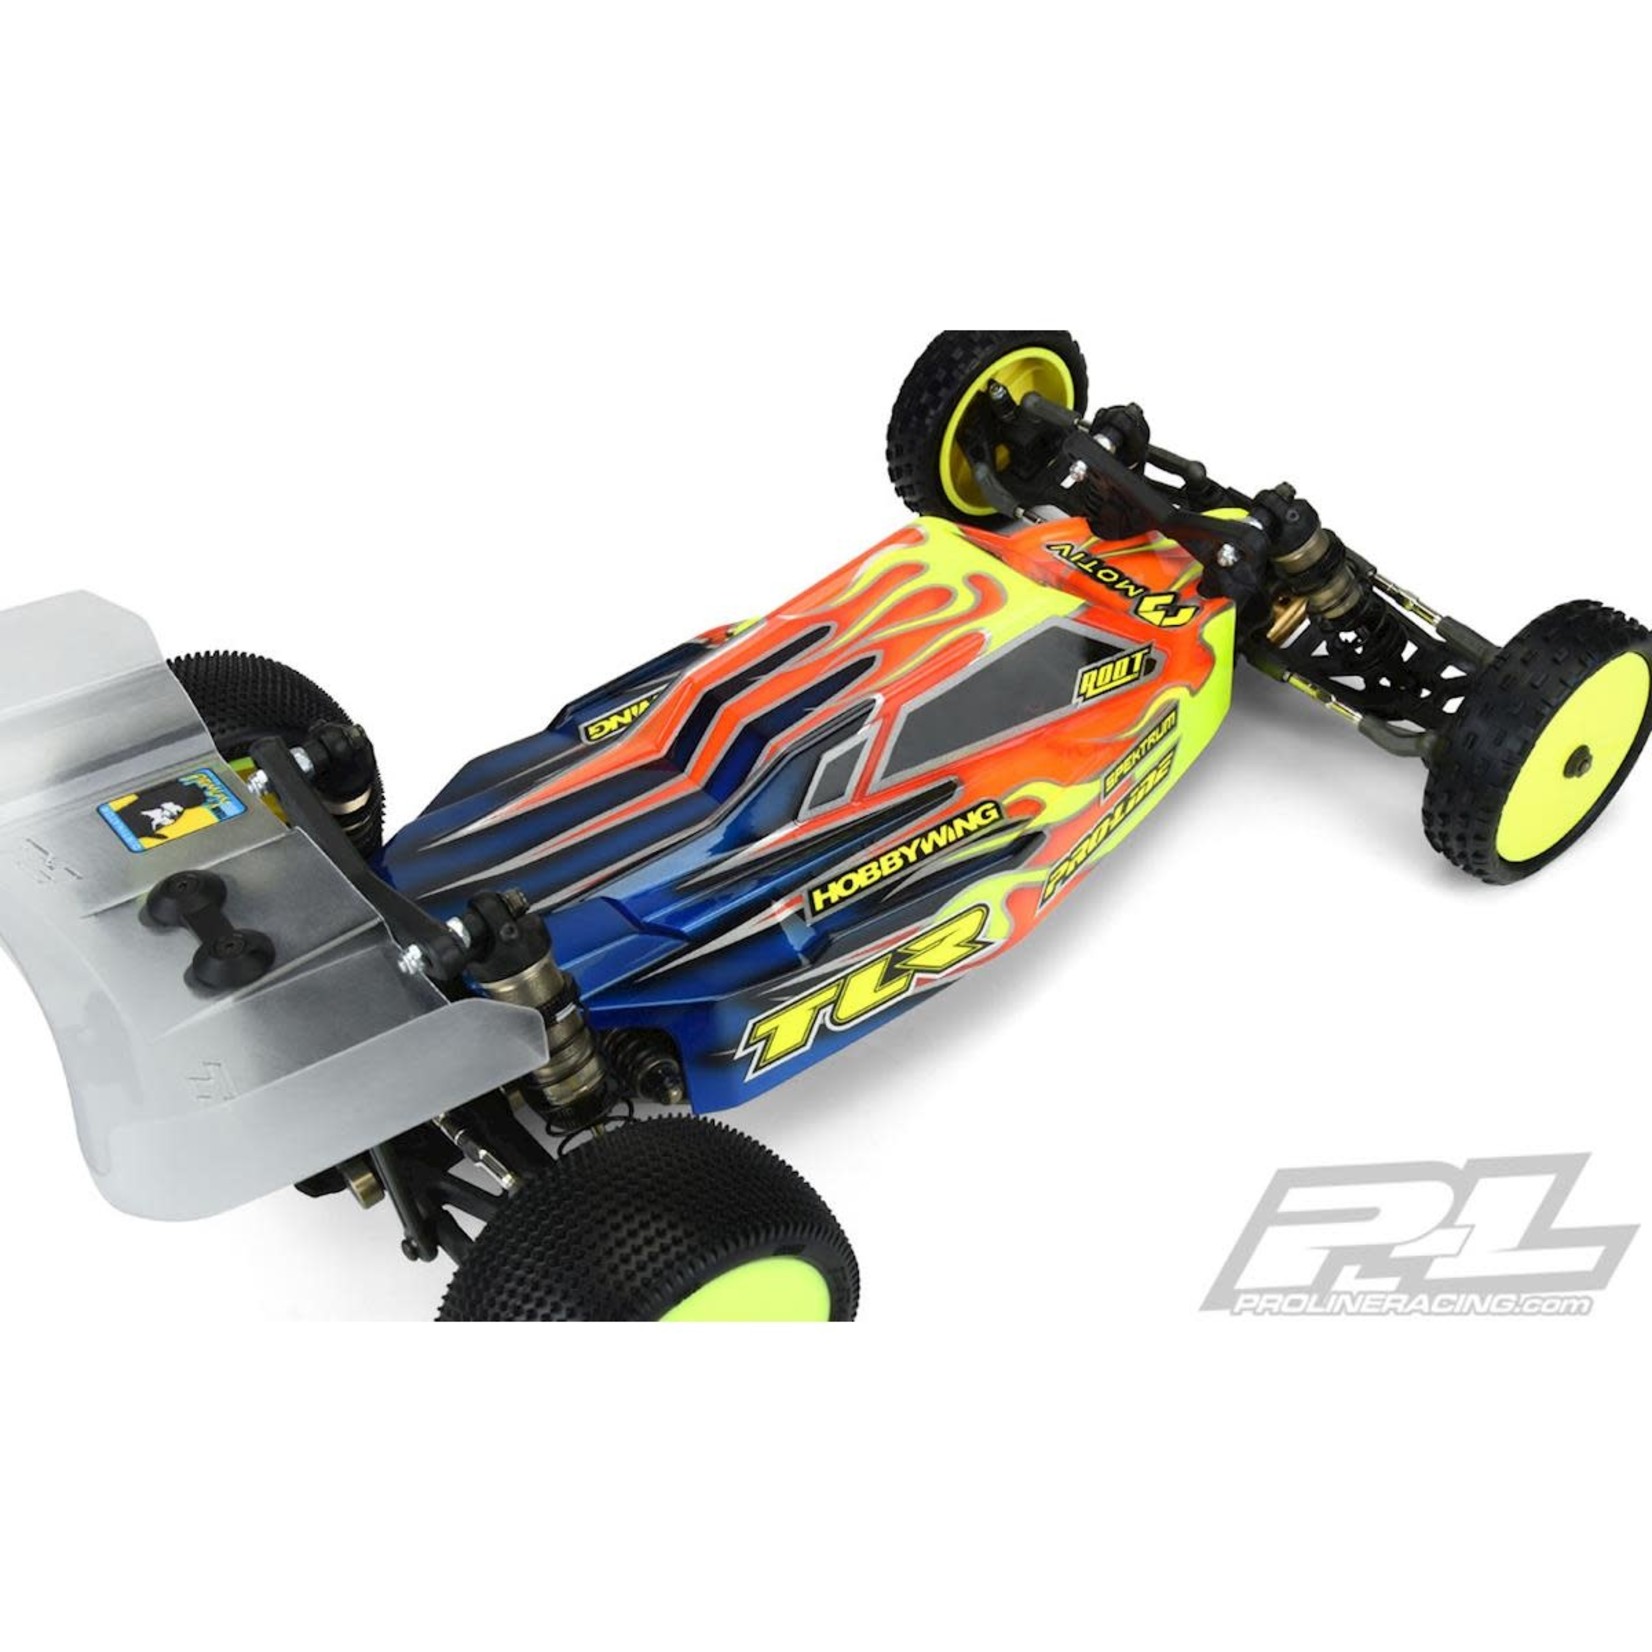 Pro-Line Pro-Line TLR 22 5.0 Axis 2WD 1/10 Buggy Body (Clear) (Lightweight) #3540-25